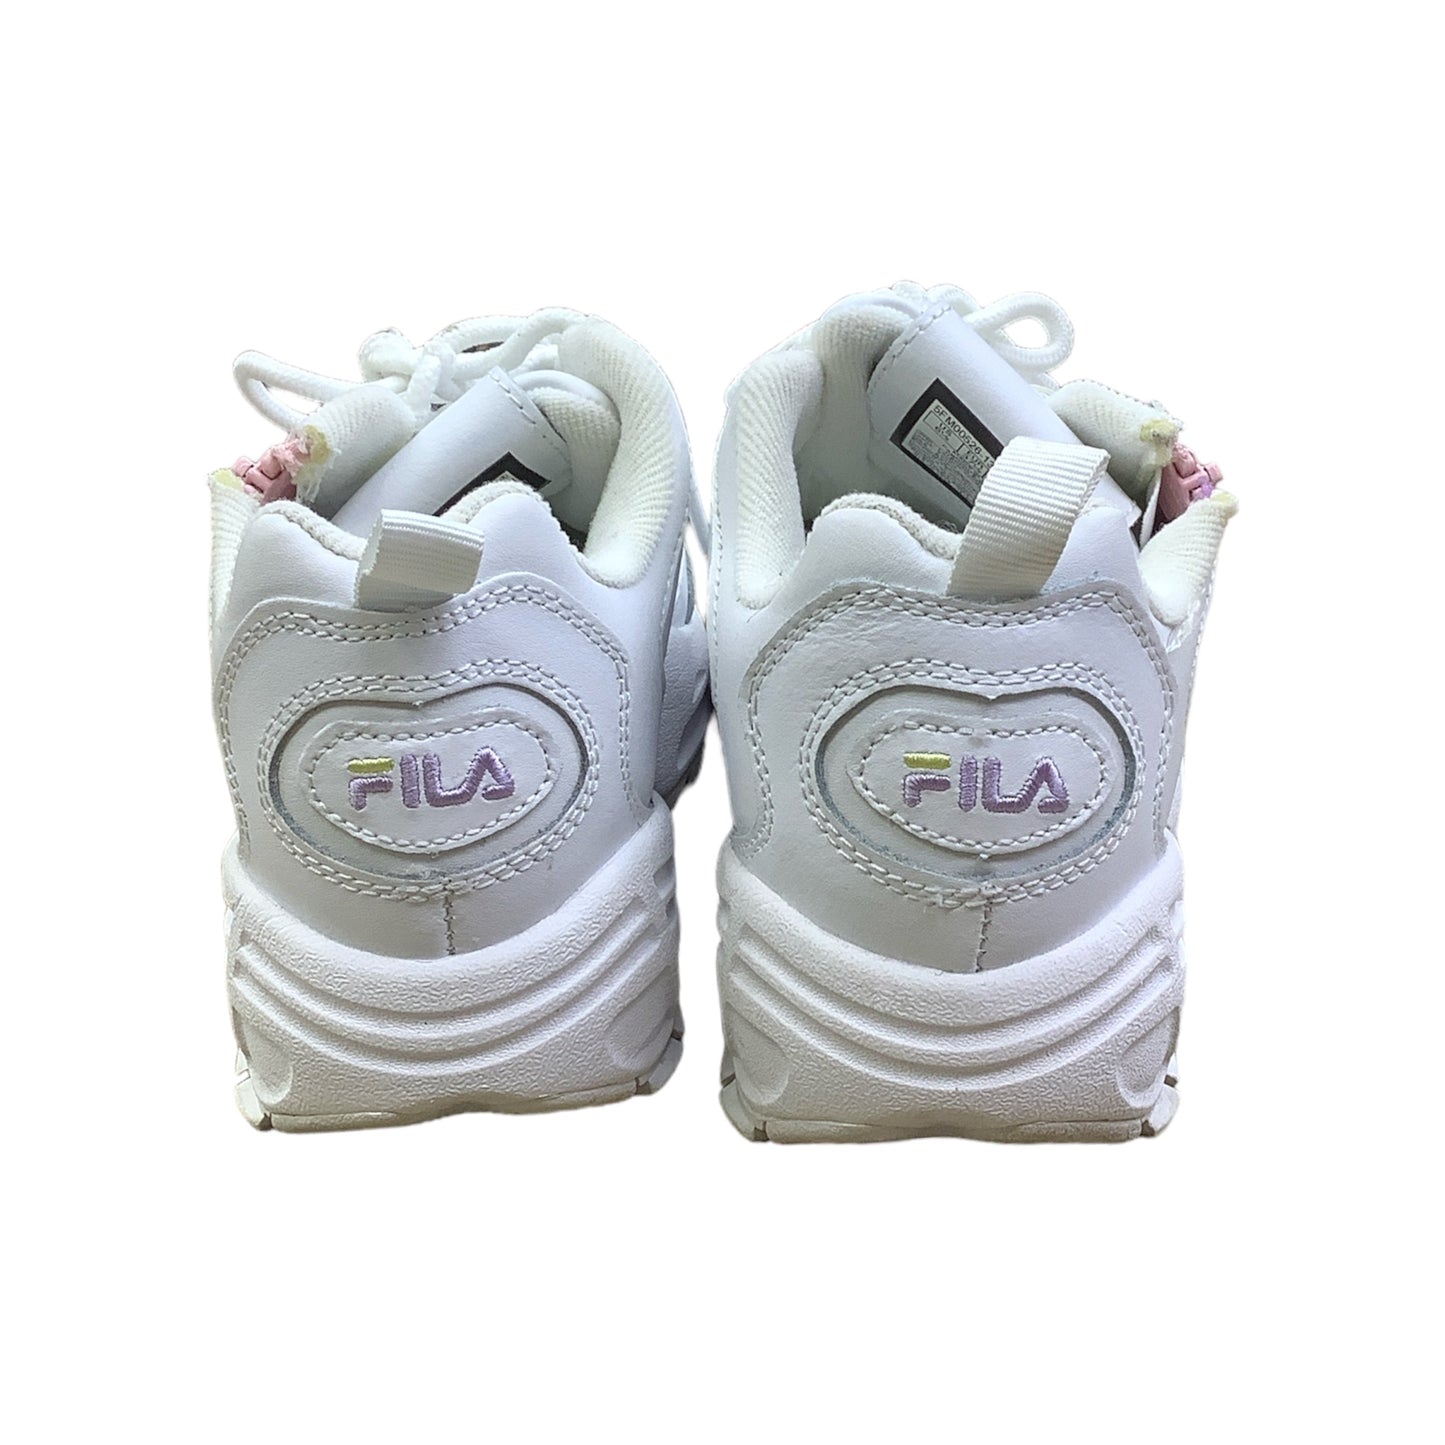 Shoes Sneakers Platform By Fila  Size: 6.5